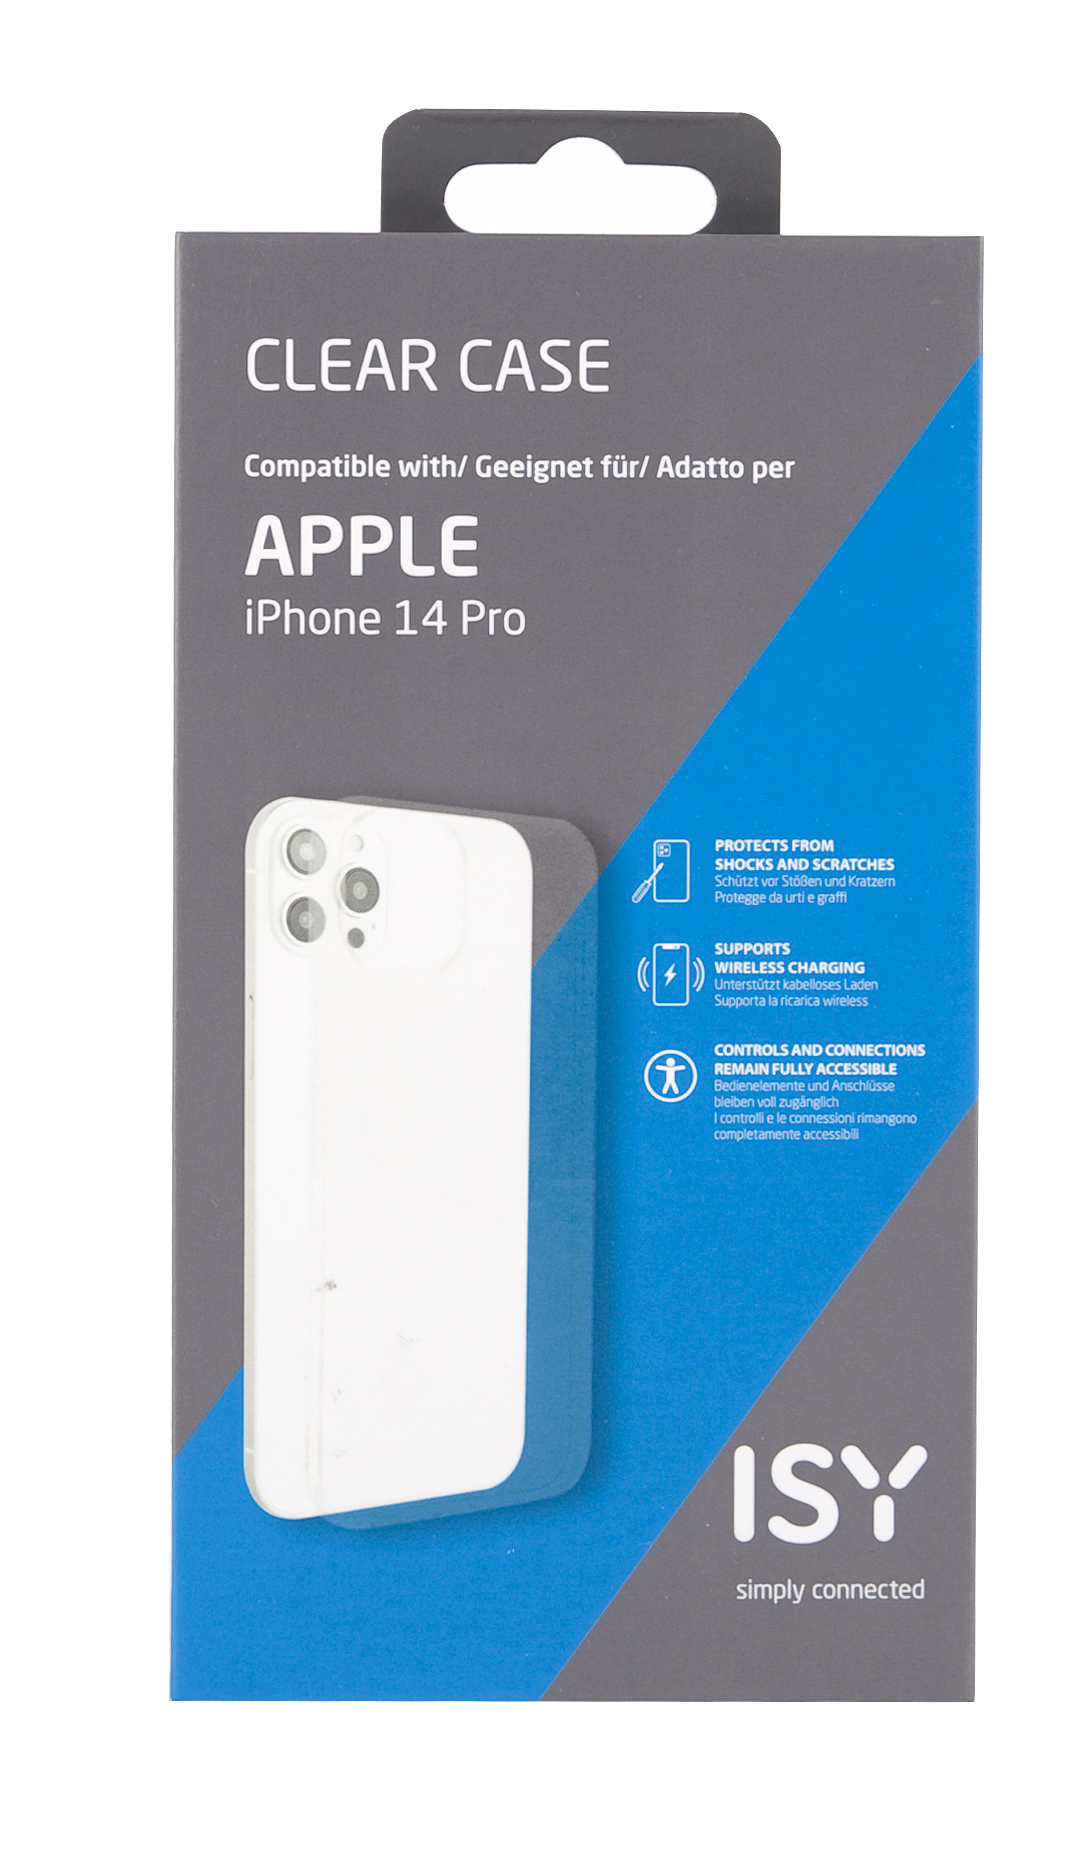 ISY ISC-1027, Backcover, Apple, 14 iPhone Transparent Pro